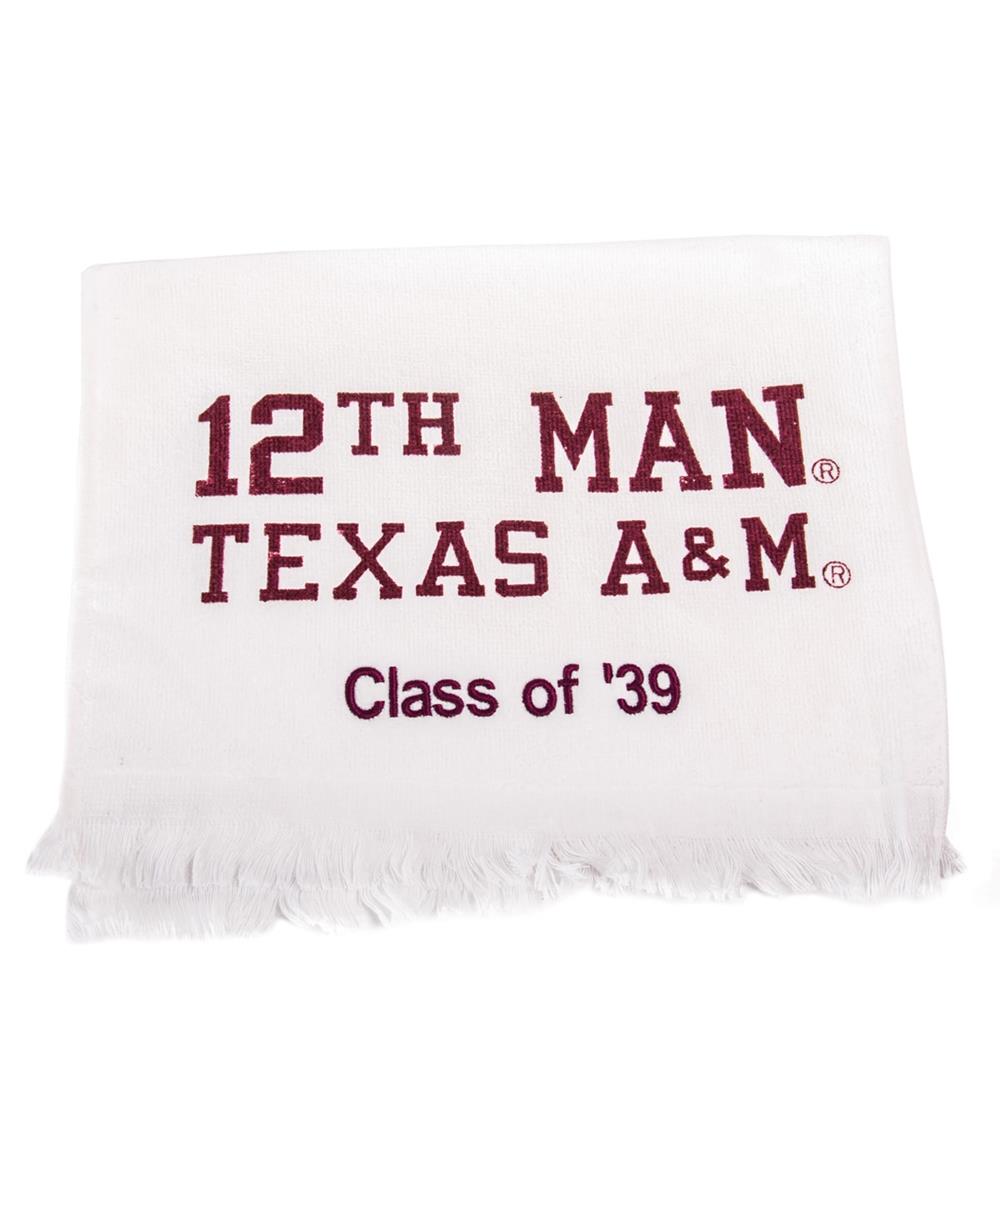 Texas A&M Aggie Lone Star 12th Man Towel 10 Pack White Aggie Towel Aggieland Outfitters Rally Towel College Football Game Day Essentials 